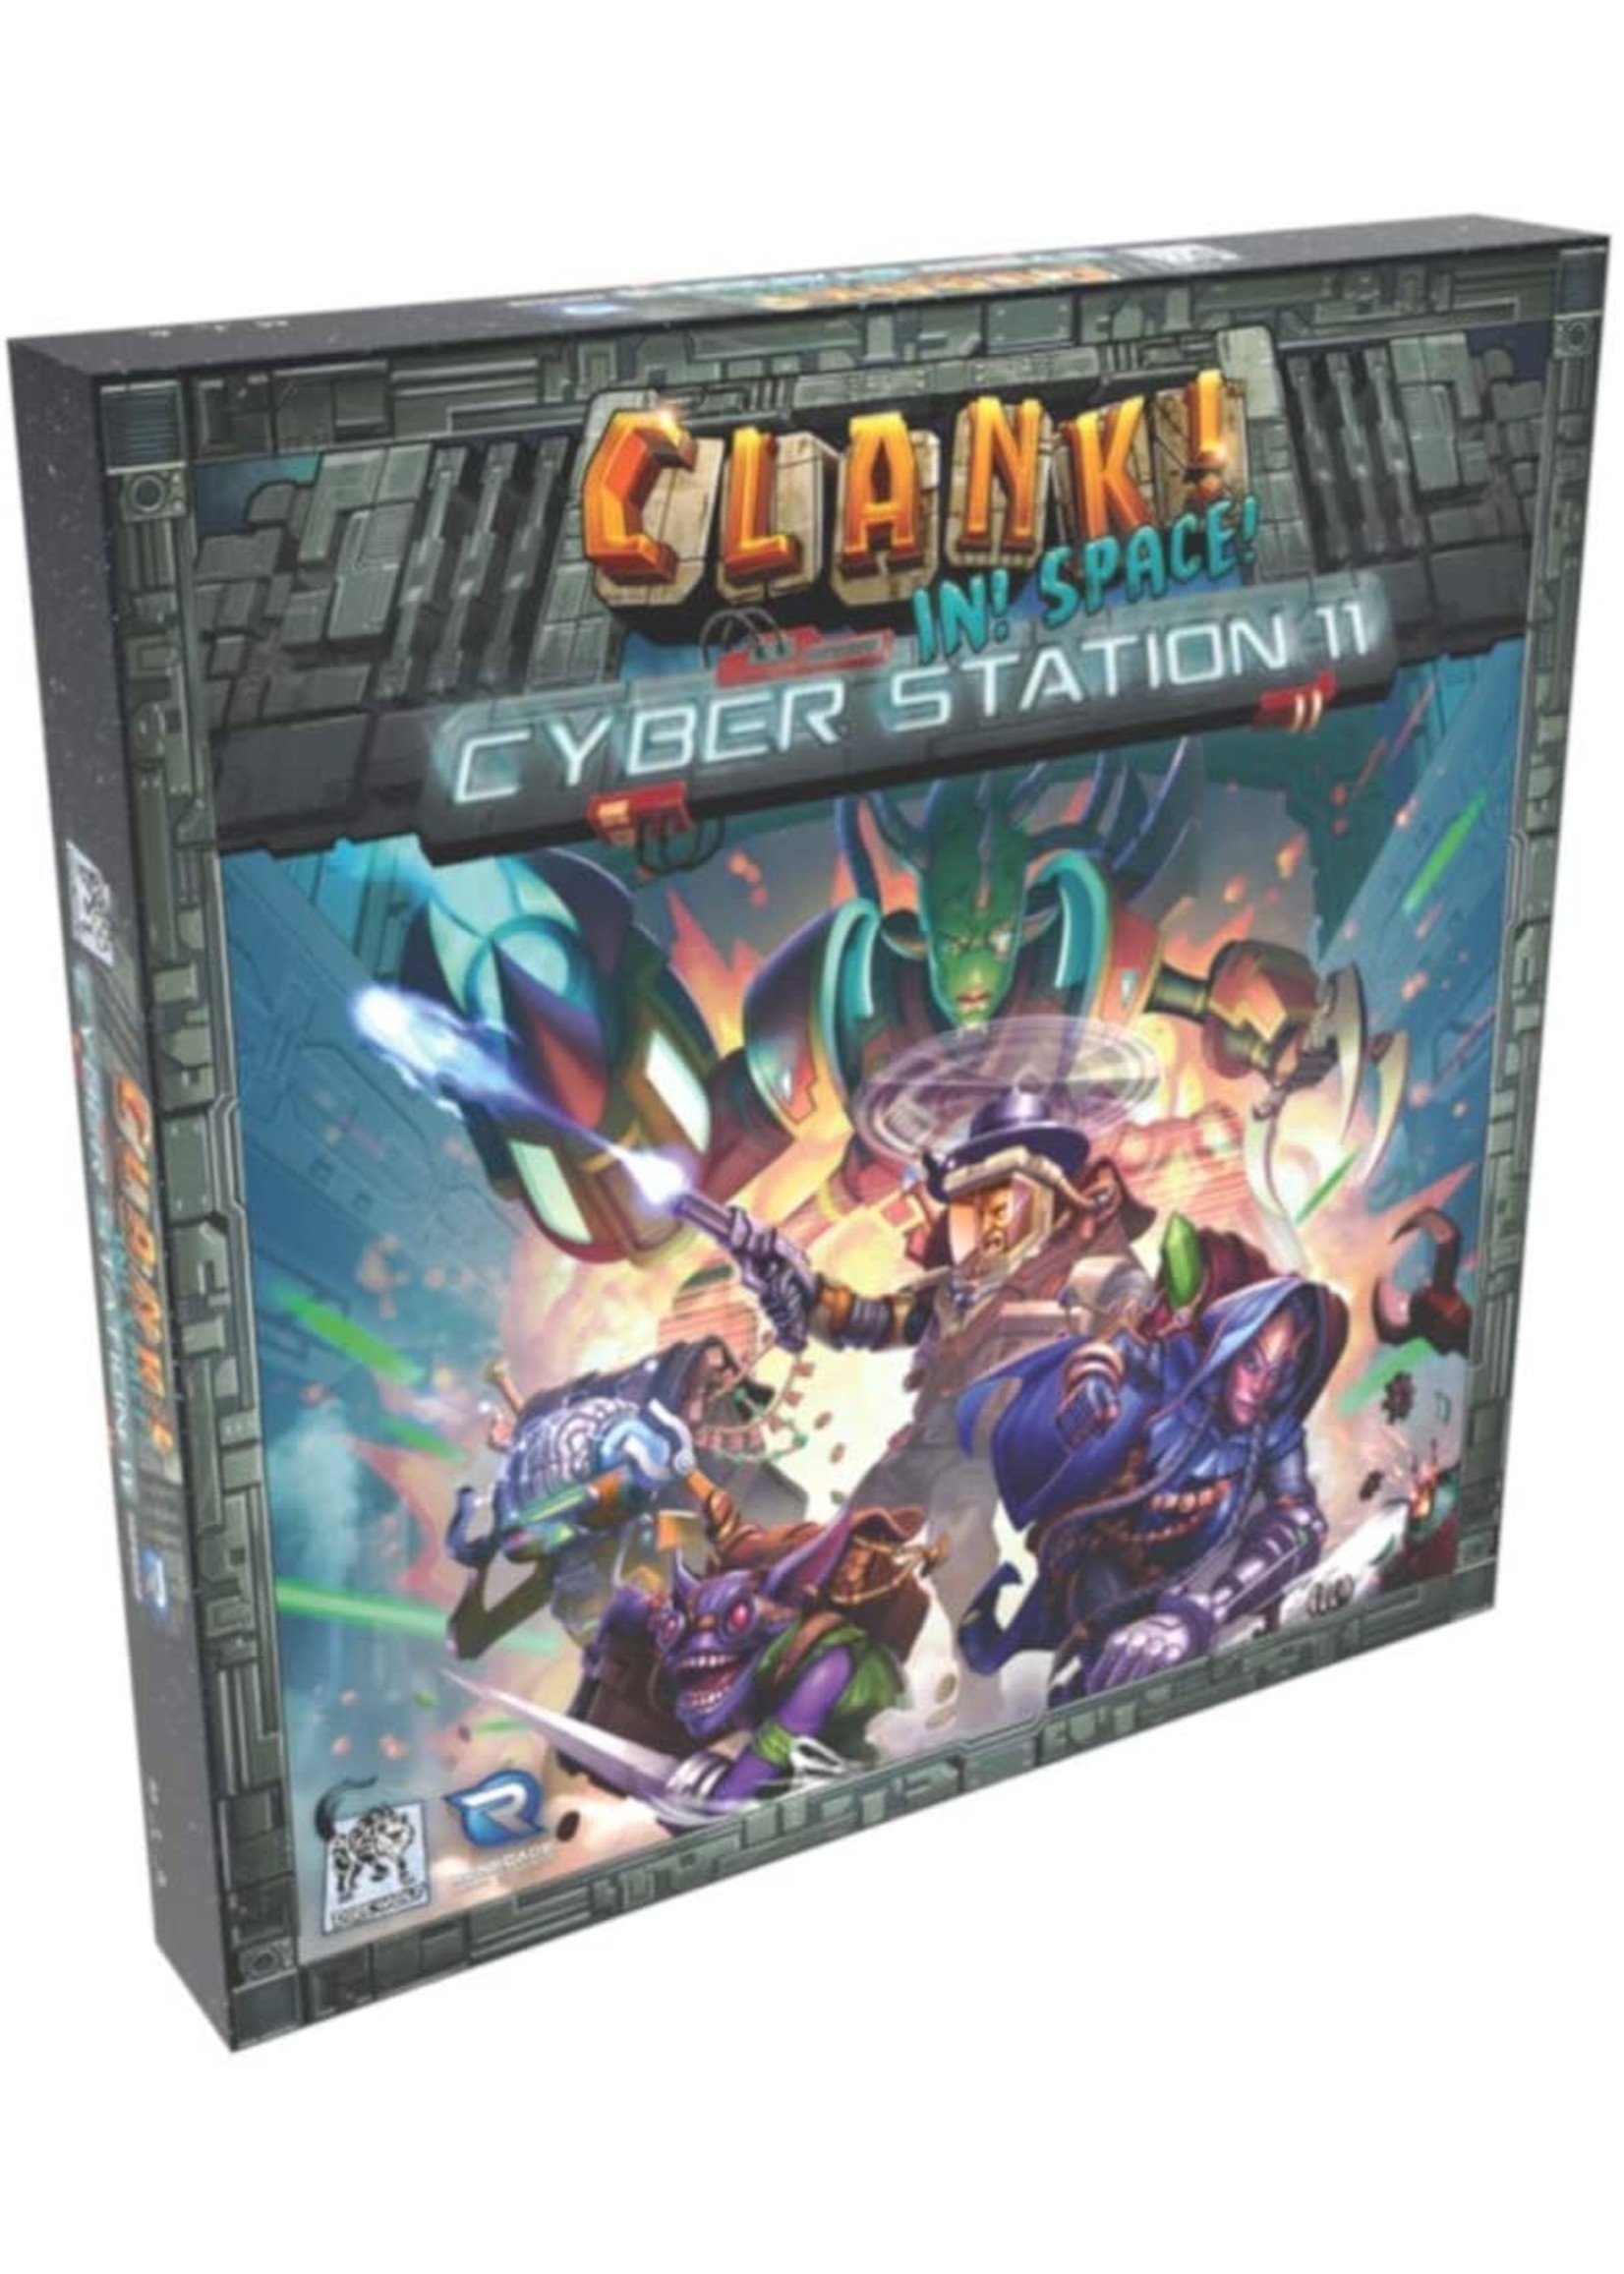 Renegade Game Studios Clank! In Space! Cyber Station 11